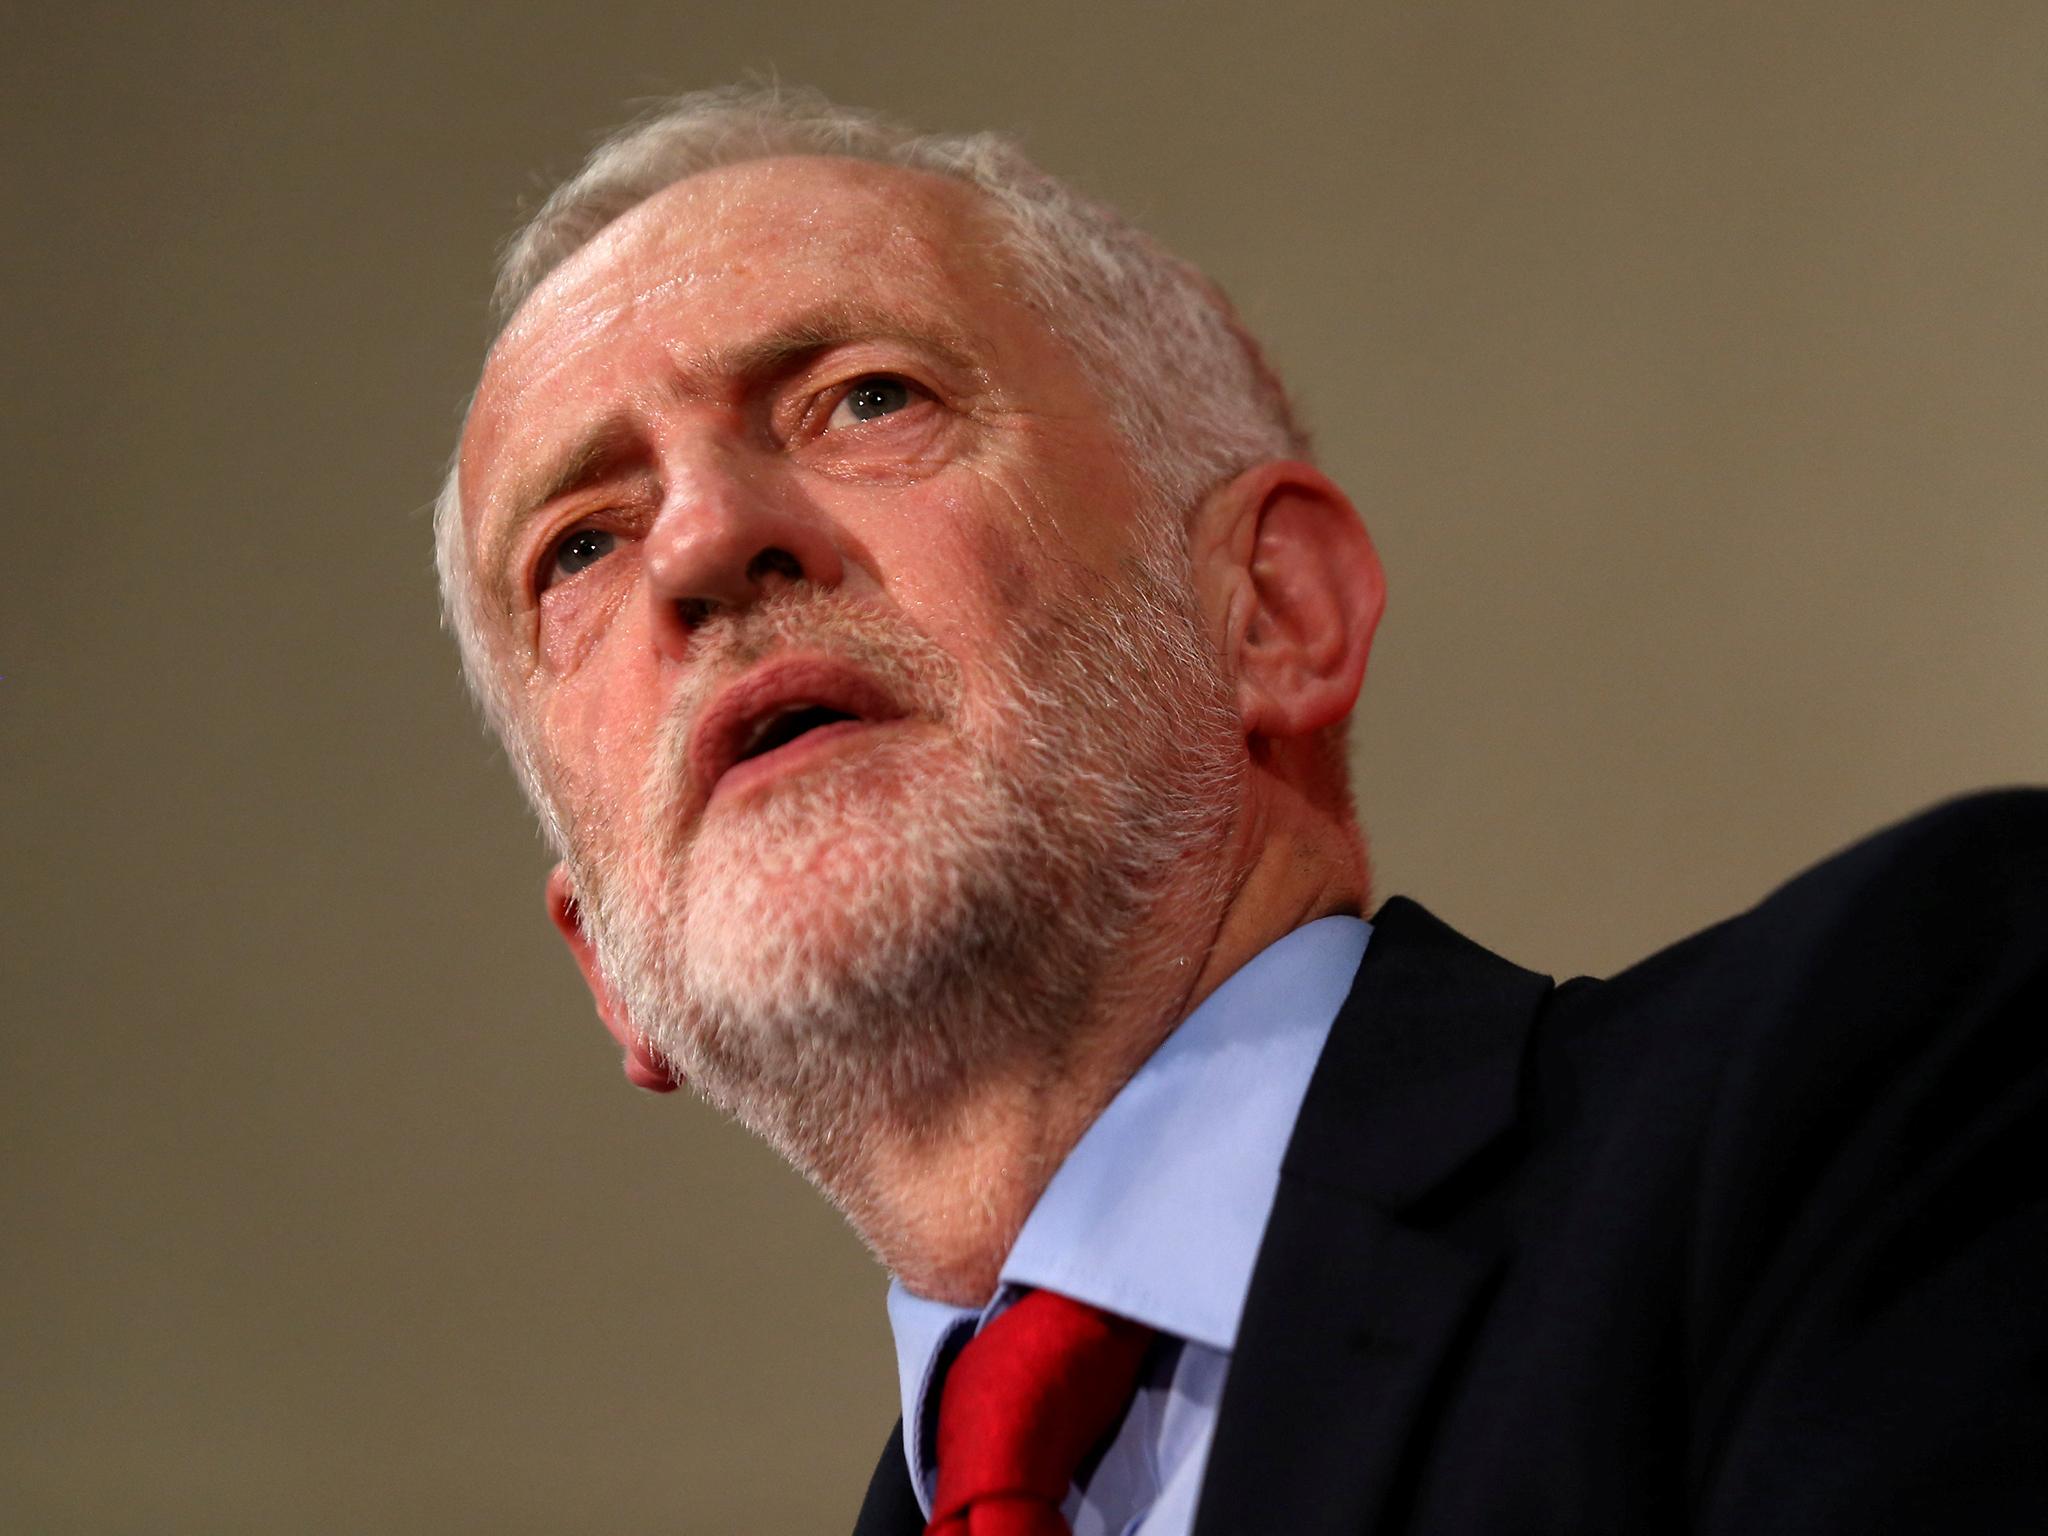 Jeremy Corbyn, leader of the Labour Party, has seen a remarkable turnaround in the polls